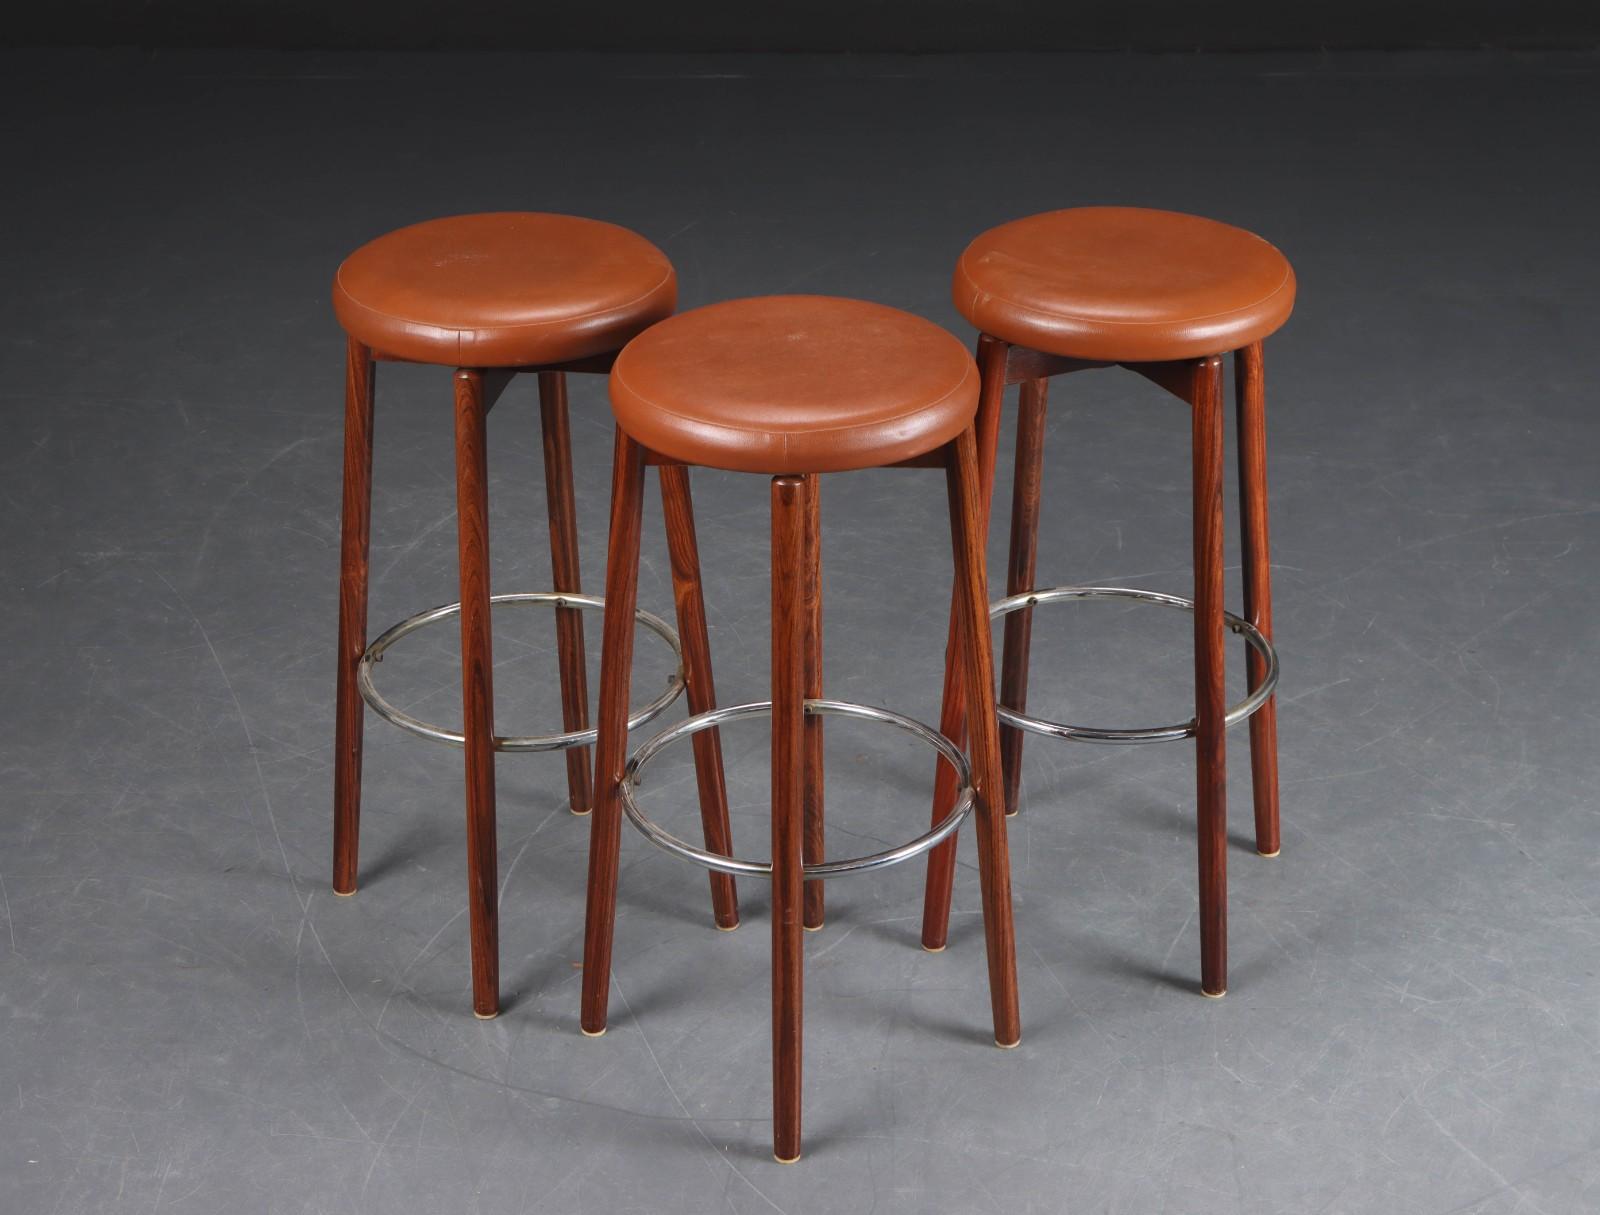 Three bar stools with hardwood frames, 1960s, H 80 cm. Seats upholstered in cognac-colored imitation leather.